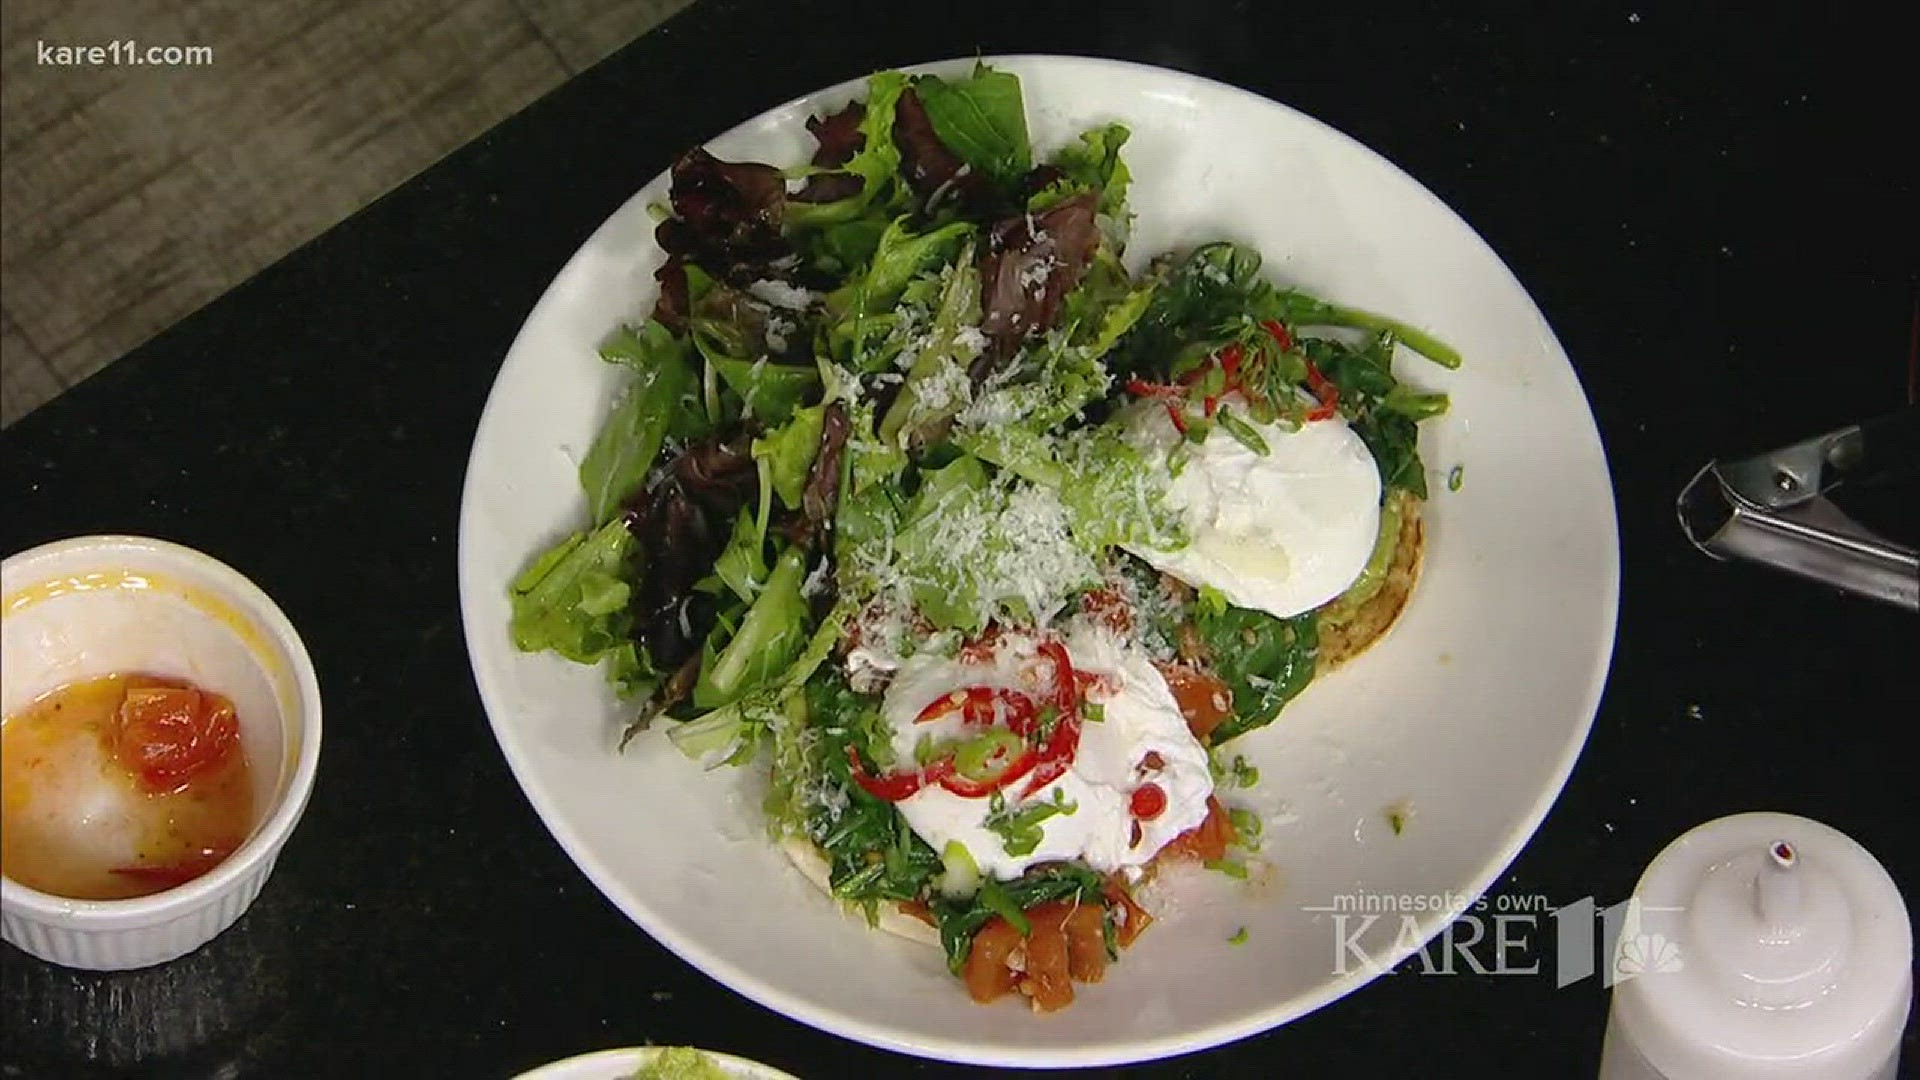 Benedict's in Wayzata serves breakfast and lunch daily and can satisfy your healthy or more indulgent side. Executive Chef and owner Mike Rakun shared his take on the classic Eggs Benedict. http://kare11.tv/2jeLtEl